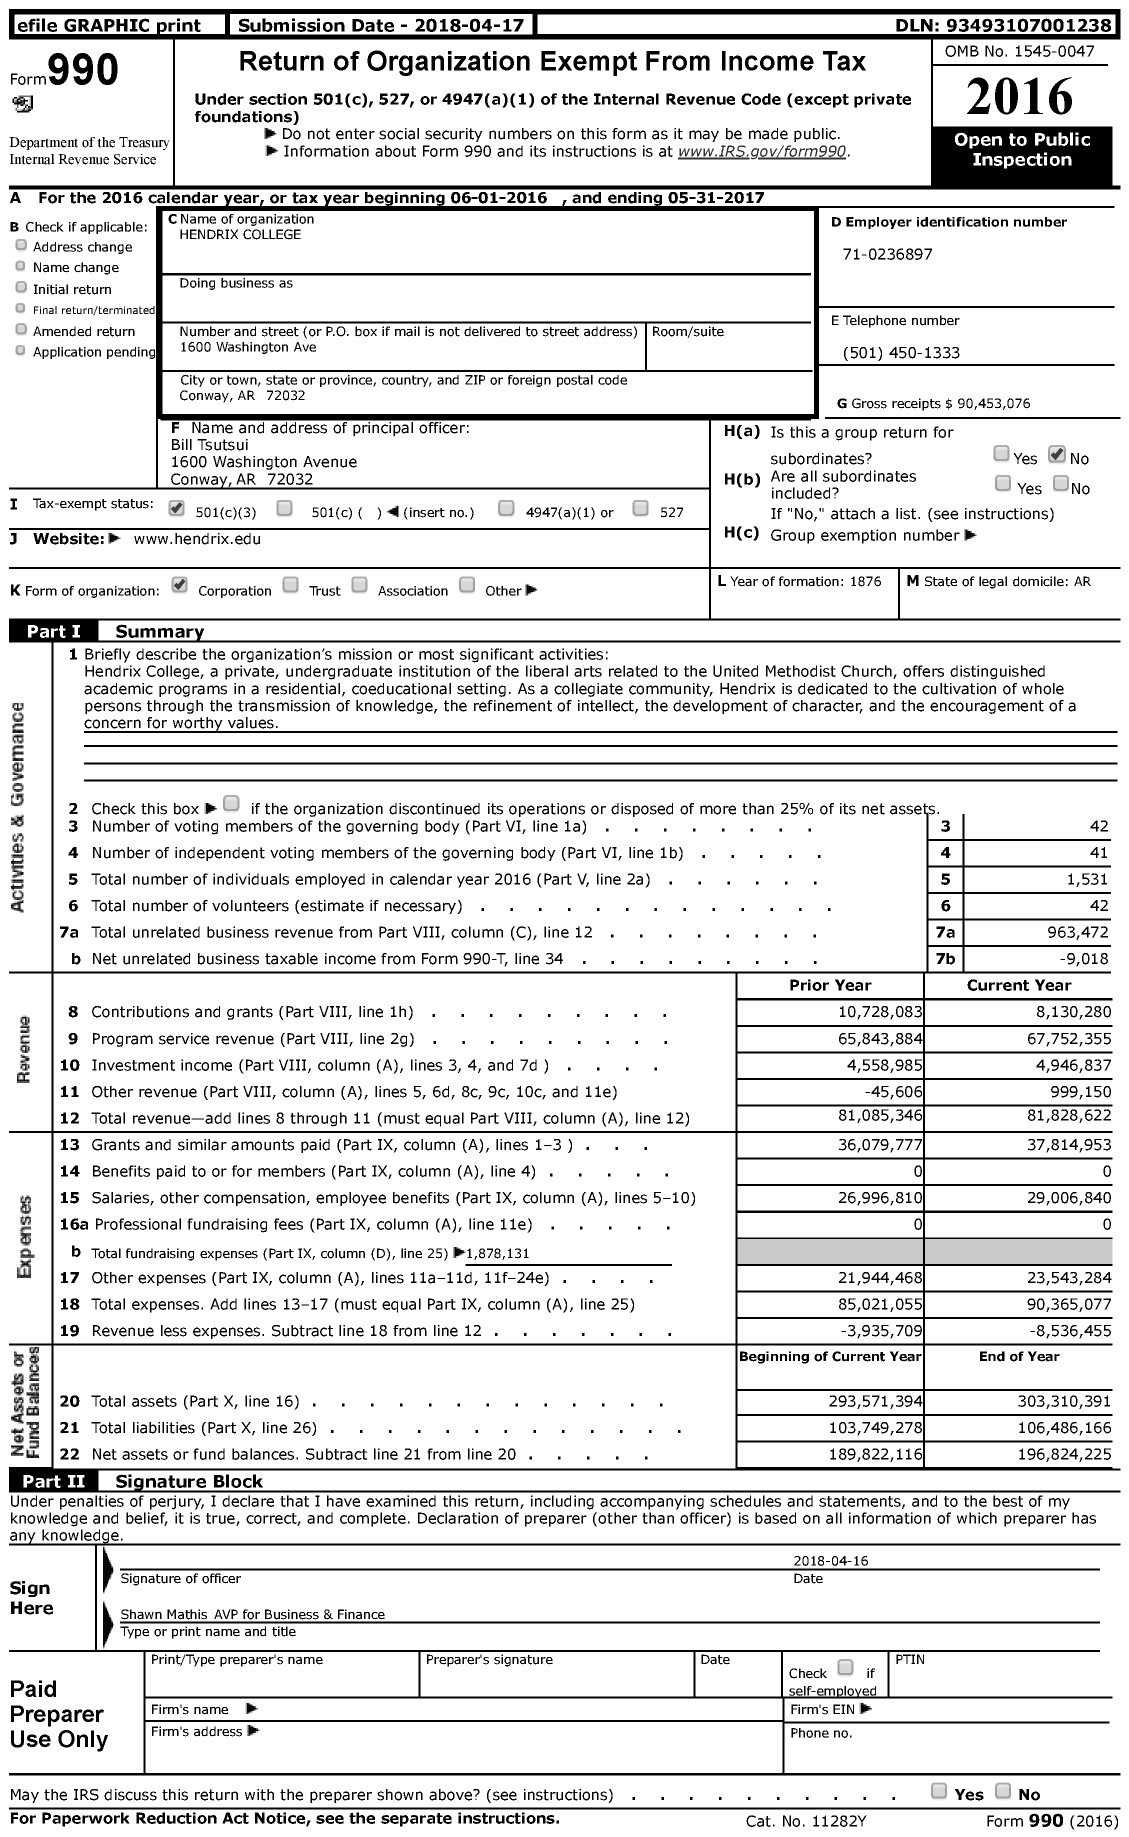 Image of first page of 2016 Form 990 for Hendrix College